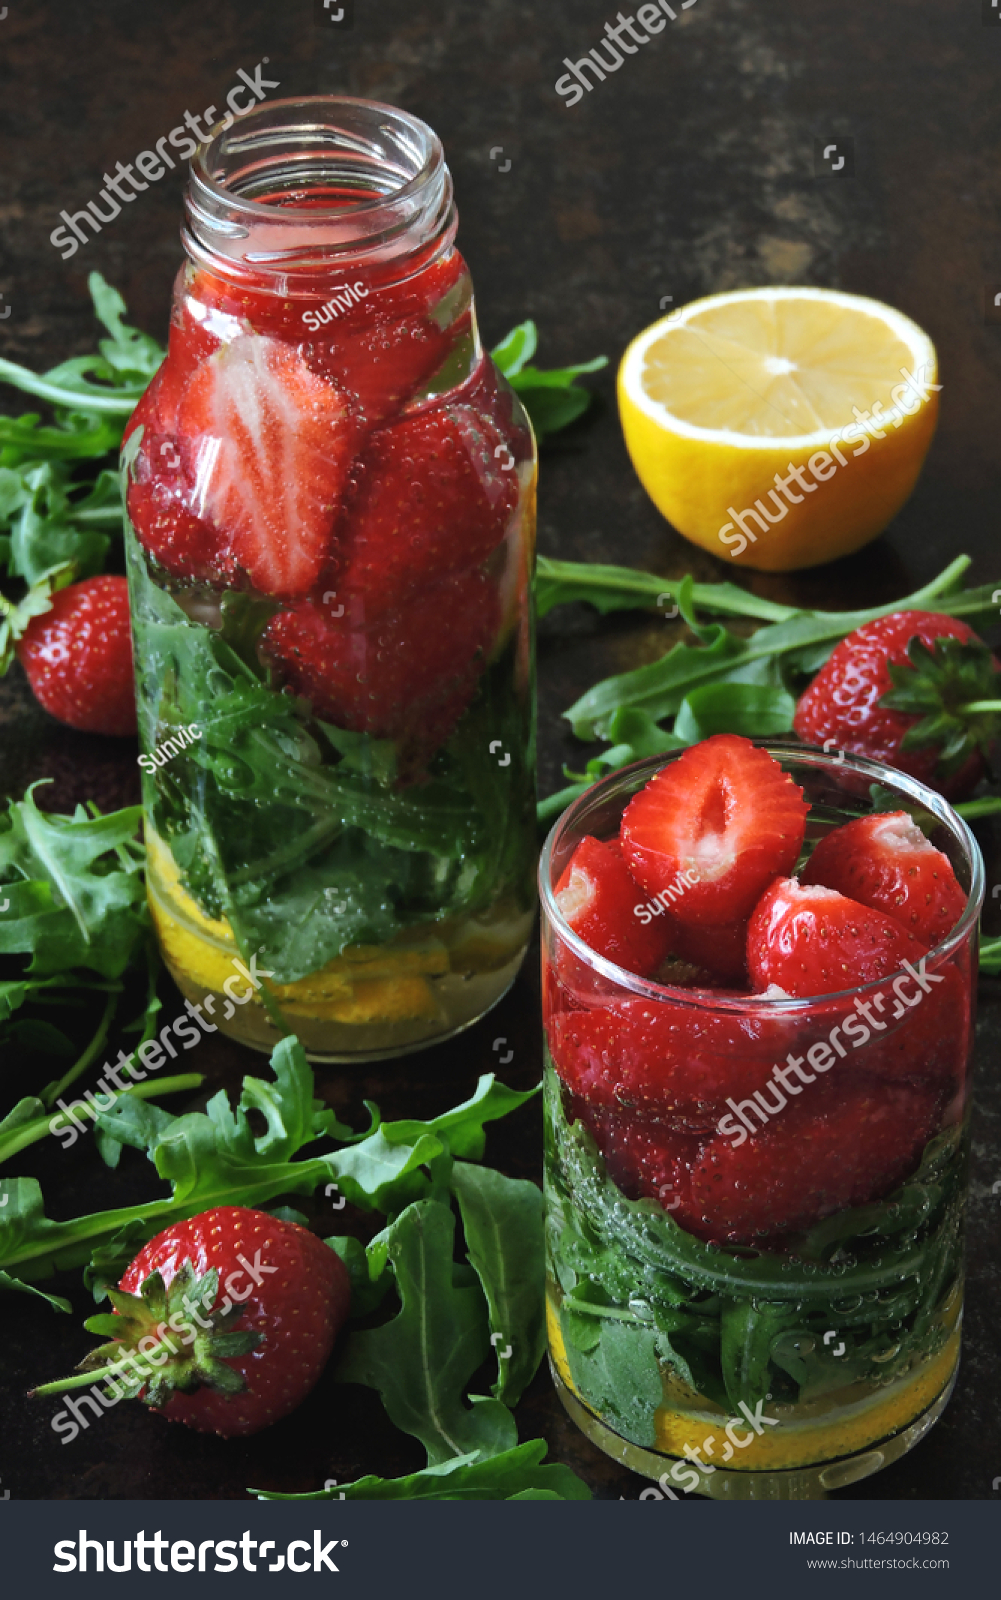 Strawberry arugula drink. A refreshing cocktail with strawberries. Detox drinks, keto drinks. Diet life style. #1464904982